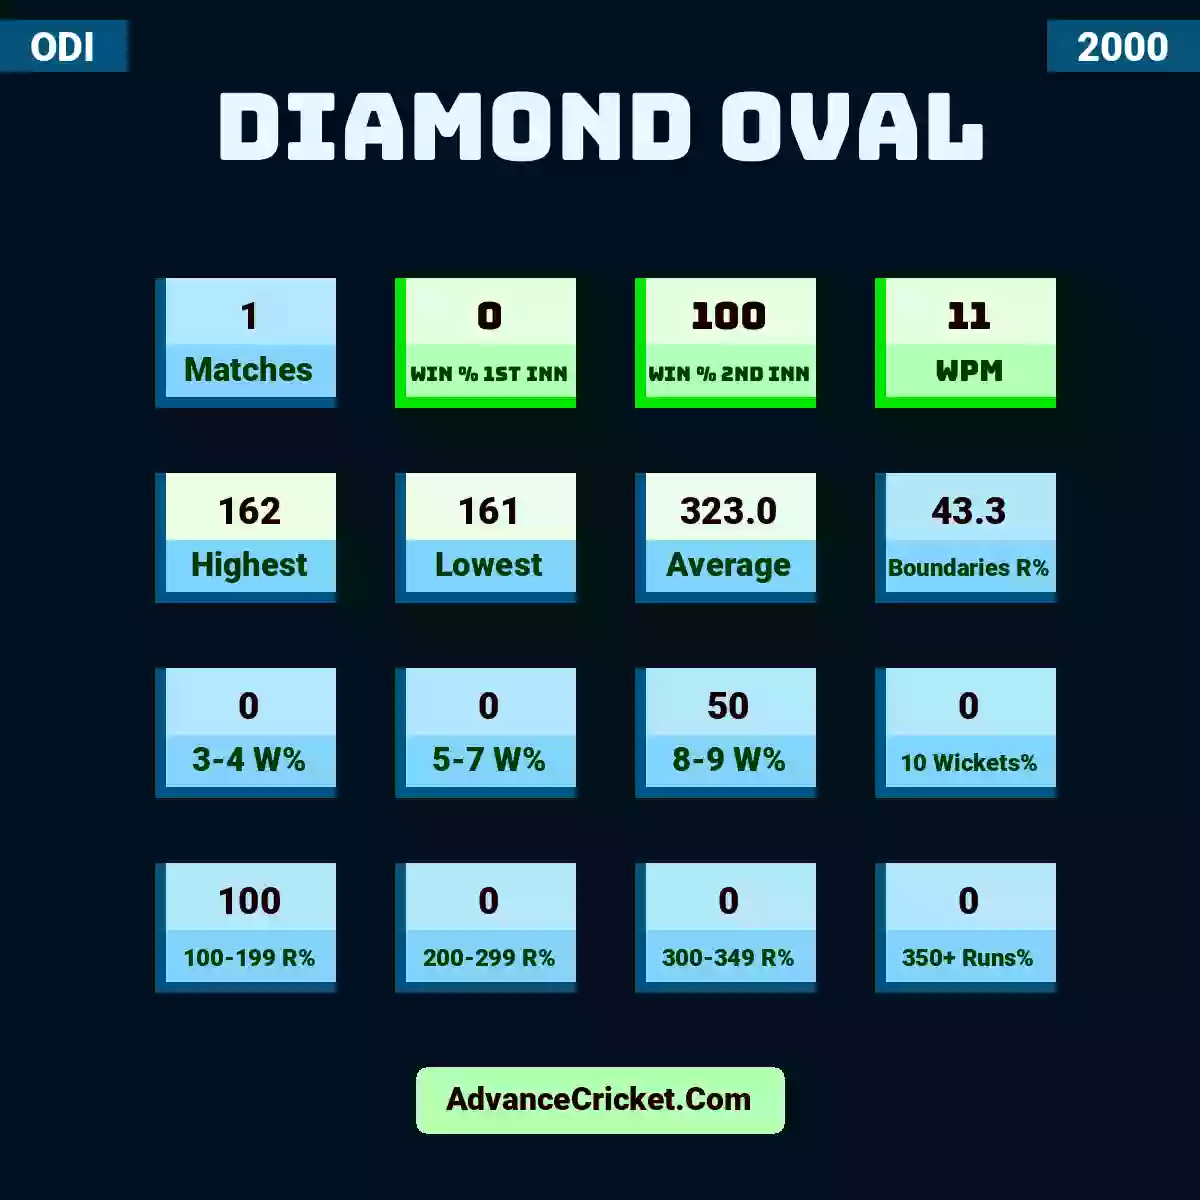 Image showing Diamond Oval with Matches: 1, Win % 1st Inn: 0, Win % 2nd Inn: 100, WPM: 11, Highest: 162, Lowest: 161, Average: 323.0, Boundaries R%: 43.3, 3-4 W%: 0, 5-7 W%: 0, 8-9 W%: 50, 10 Wickets%: 0, 100-199 R%: 100, 200-299 R%: 0, 300-349 R%: 0, 350+ Runs%: 0.